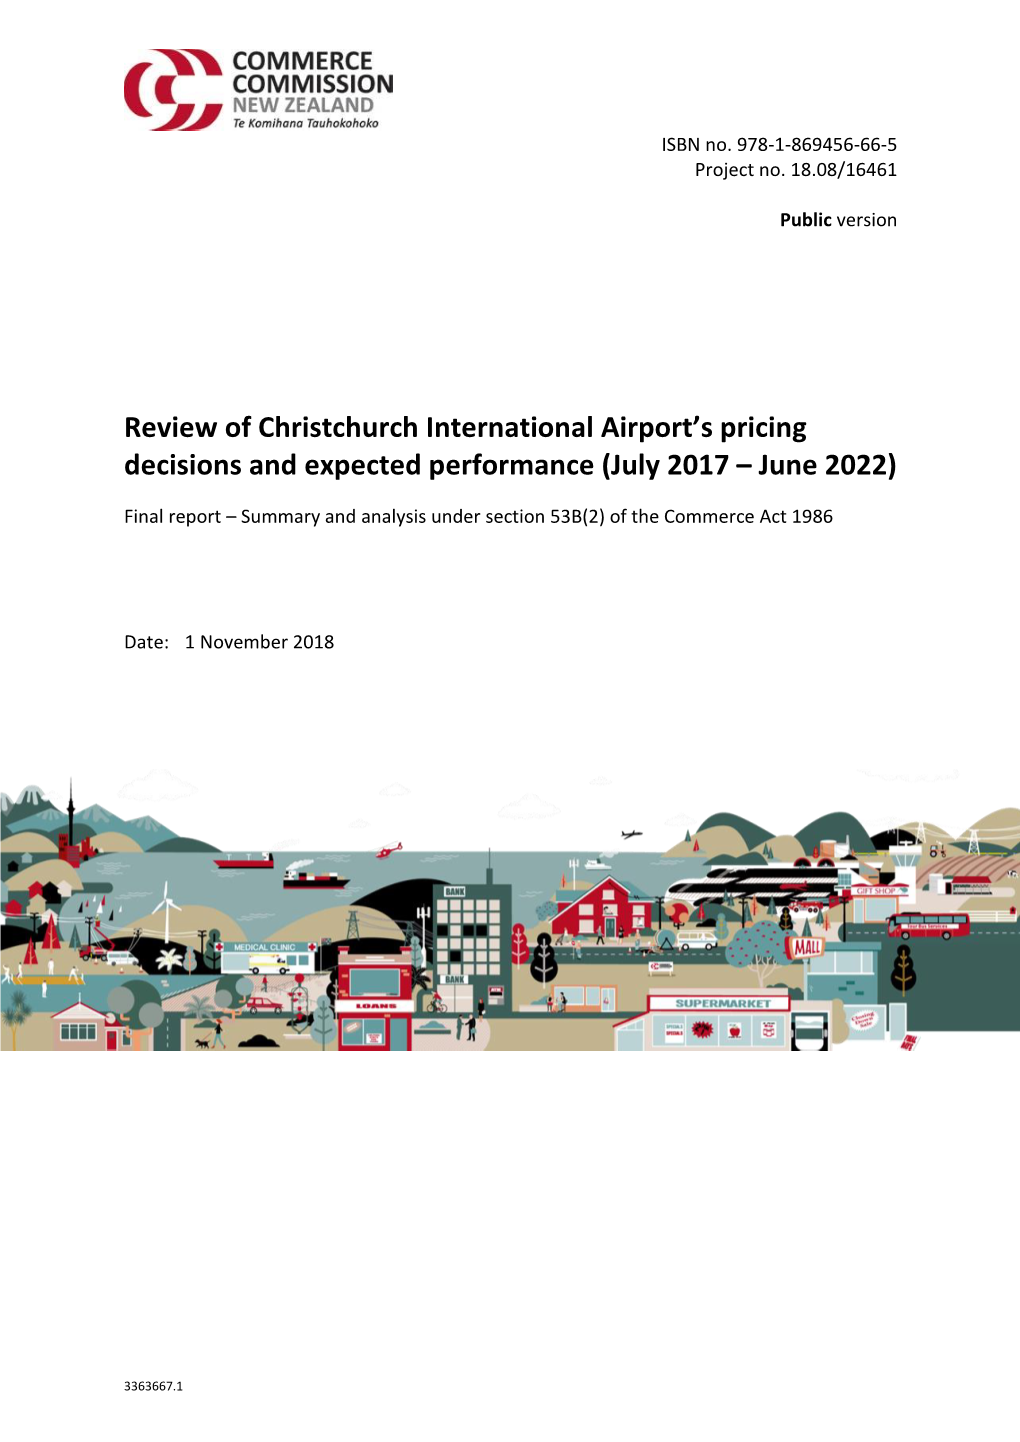 Review of Christchurch International Airport's Pricing Decisions and Expected Performance (July 2017 - June 2022) - Draft Report" (6 September 2018), Paragraphs 19-20